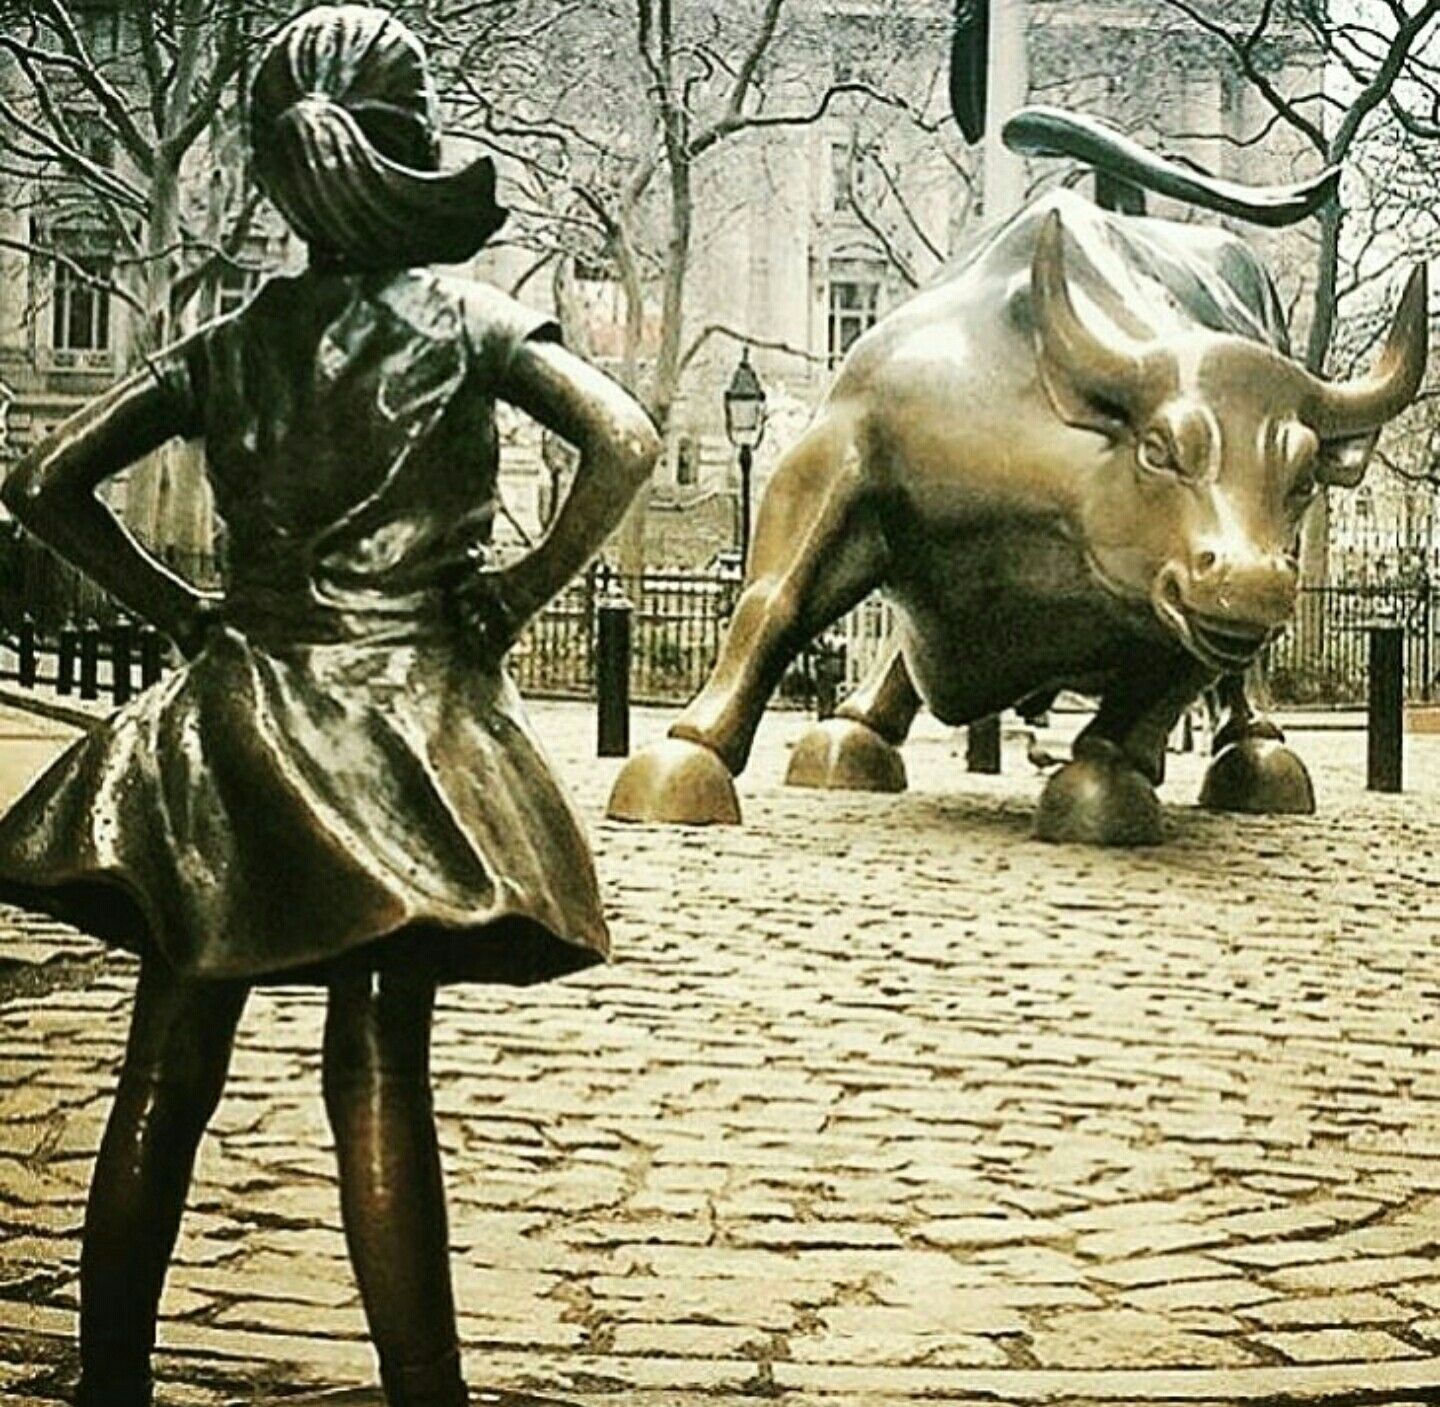 Fearless girl statue wall Street charging bull empowered strong